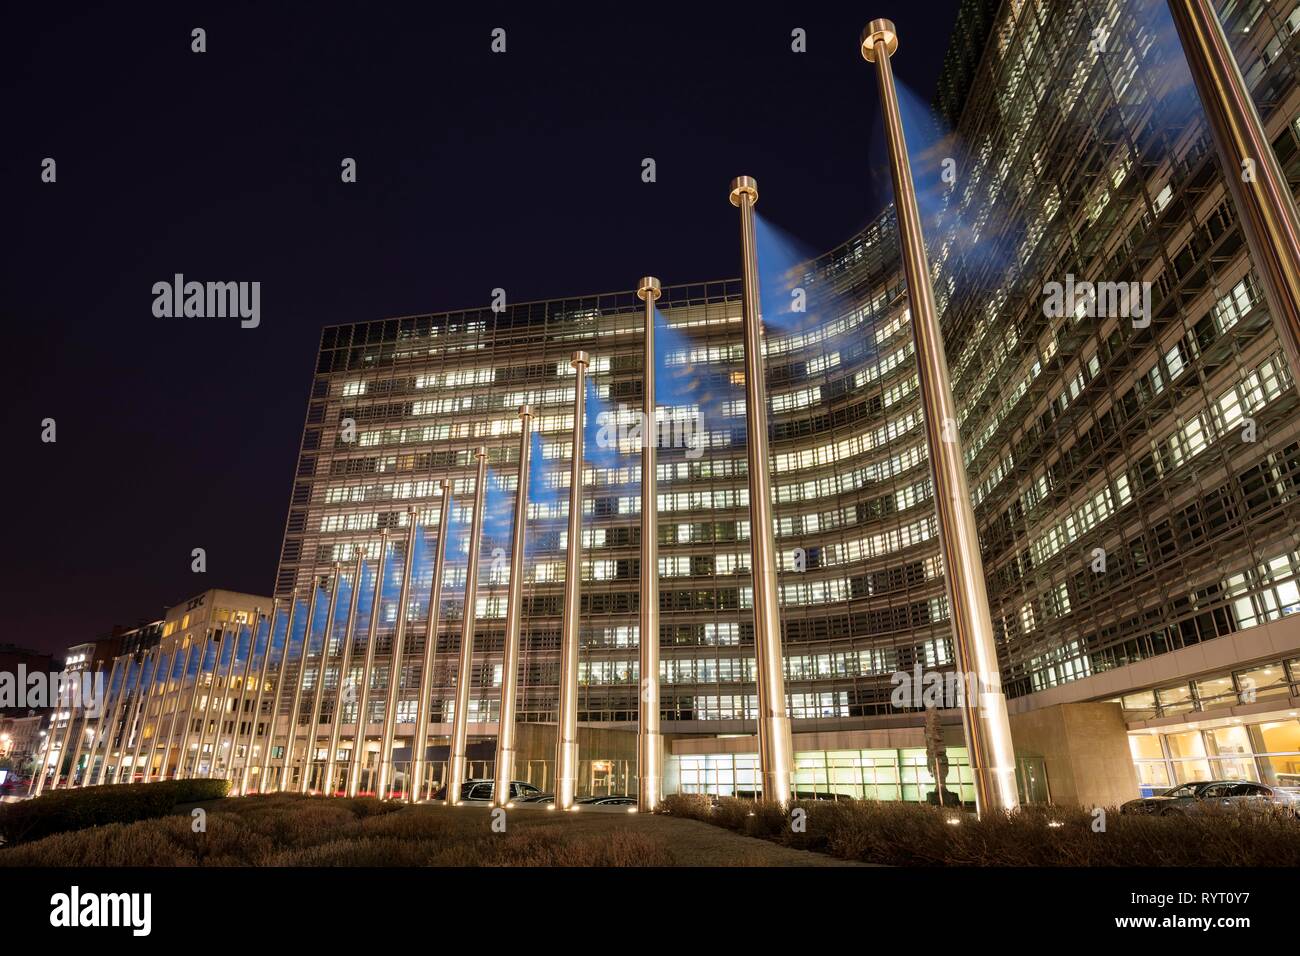 Europe flags in front of the Berlaymont building, seat of the European Commission, night shot, Europaviertel, Brussels, Belgium Stock Photo